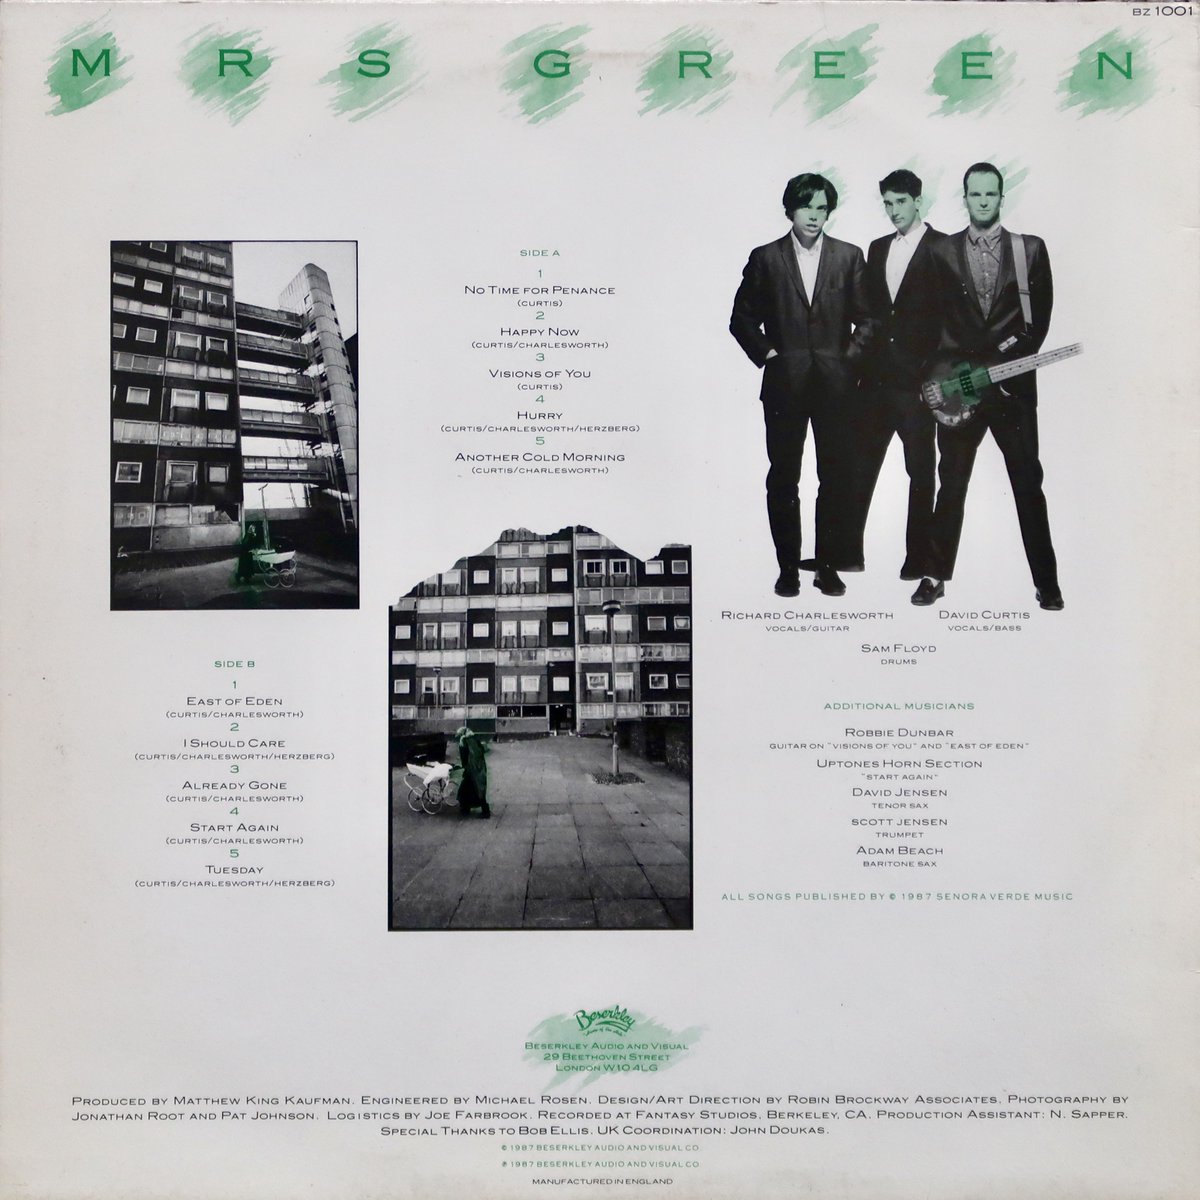 It turns out that Mrs Green were a three-piece band from California, but for some reason this album was only released in the UK (on vinyl) and in Germany (on CD). It was produced in 1987 by Berserkley founder Matthew King Kaufman. But what does it sound like? (THREAD 2 of 5)